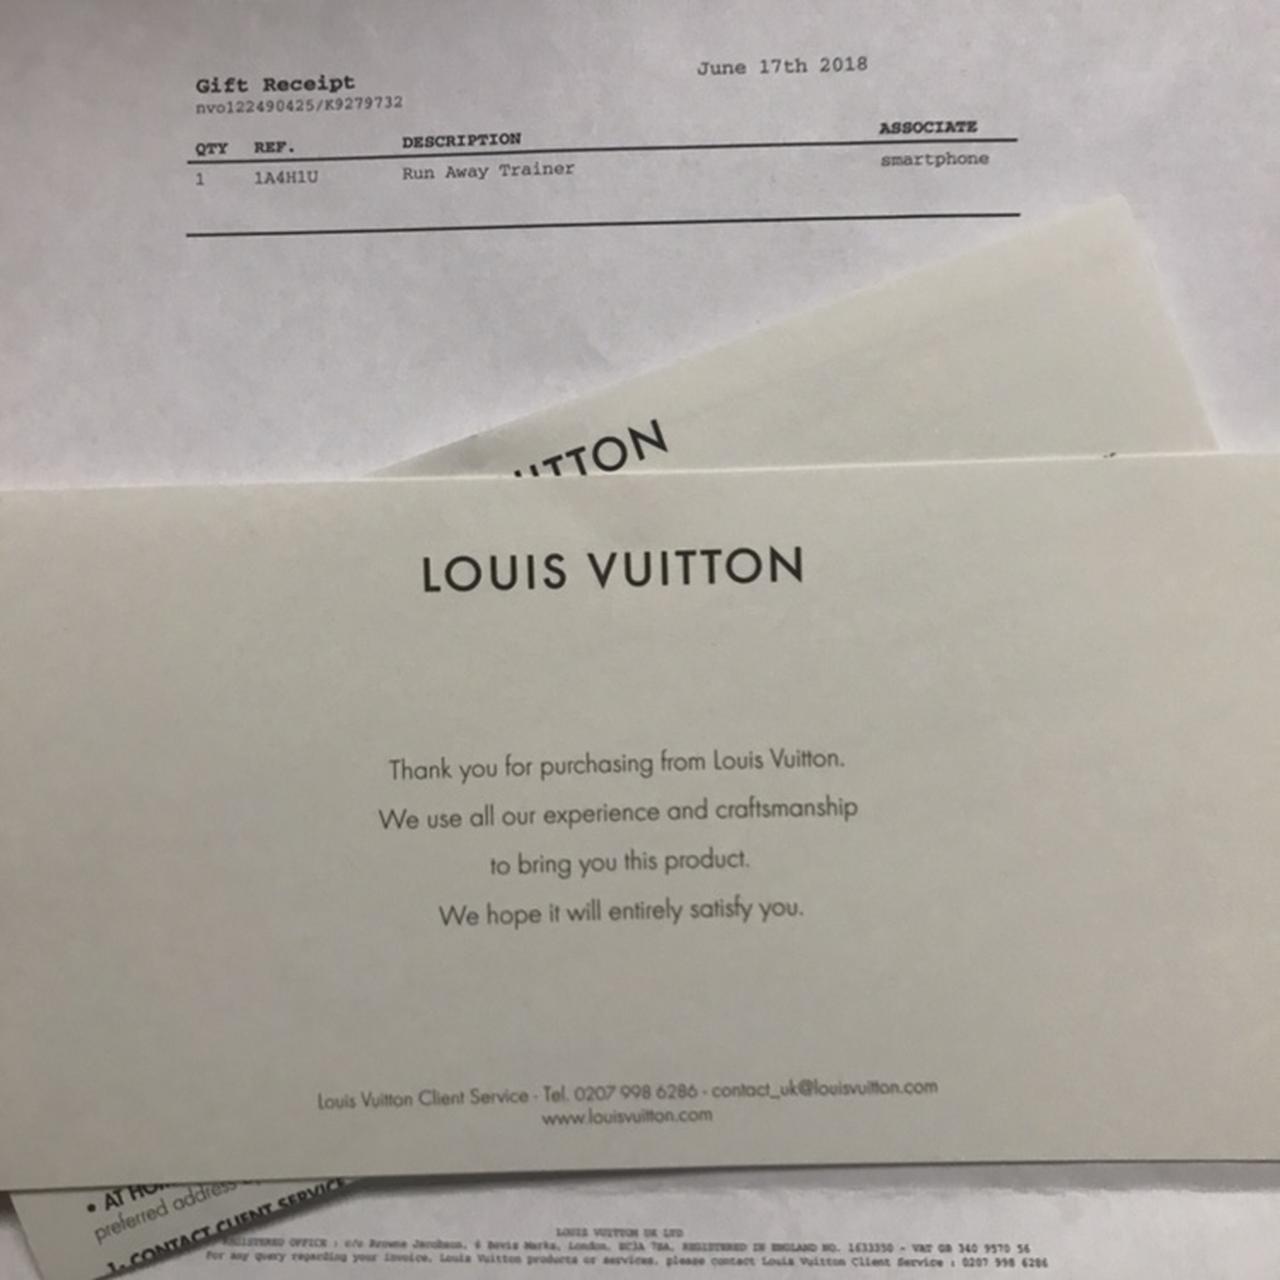 Receipts as requested for LV trainers